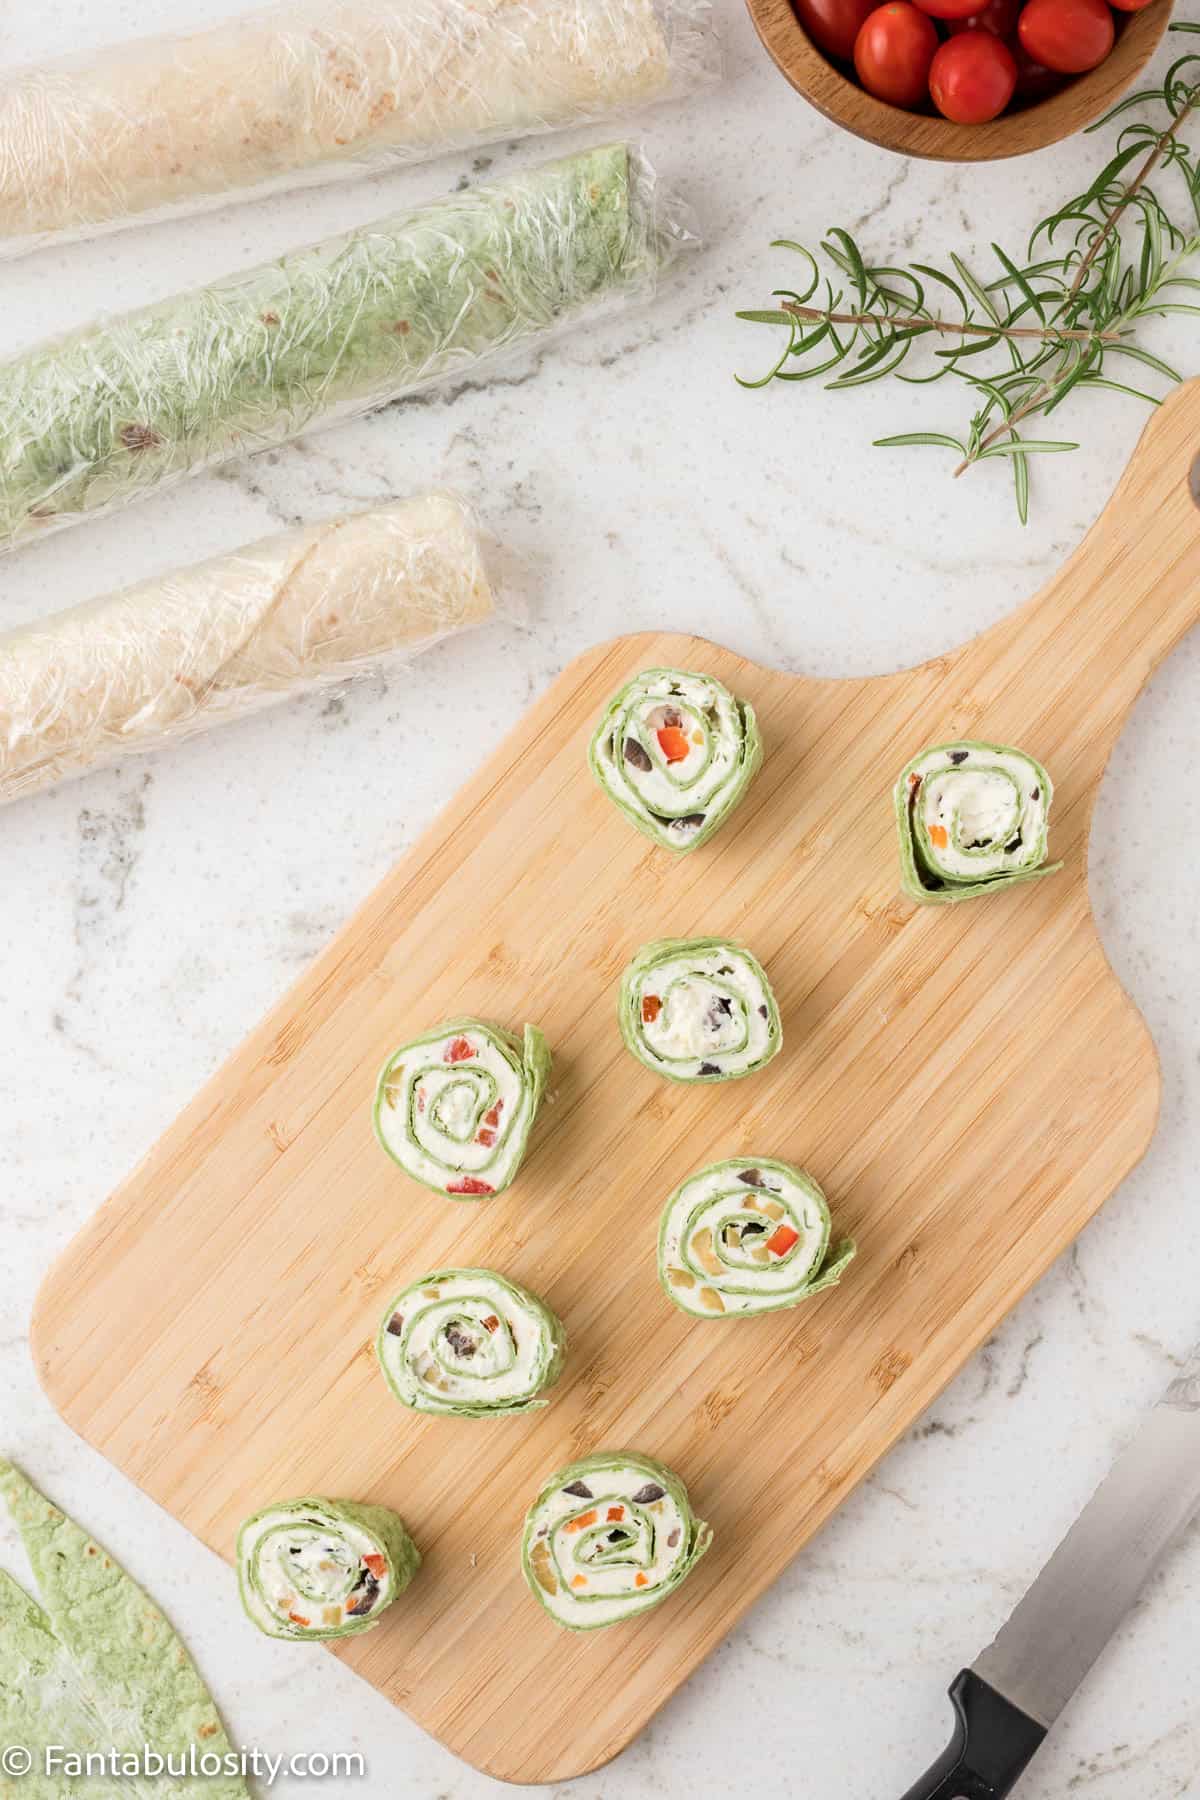 Slices of a rolled tortilla pinwheel are shown on a wooden cutting board